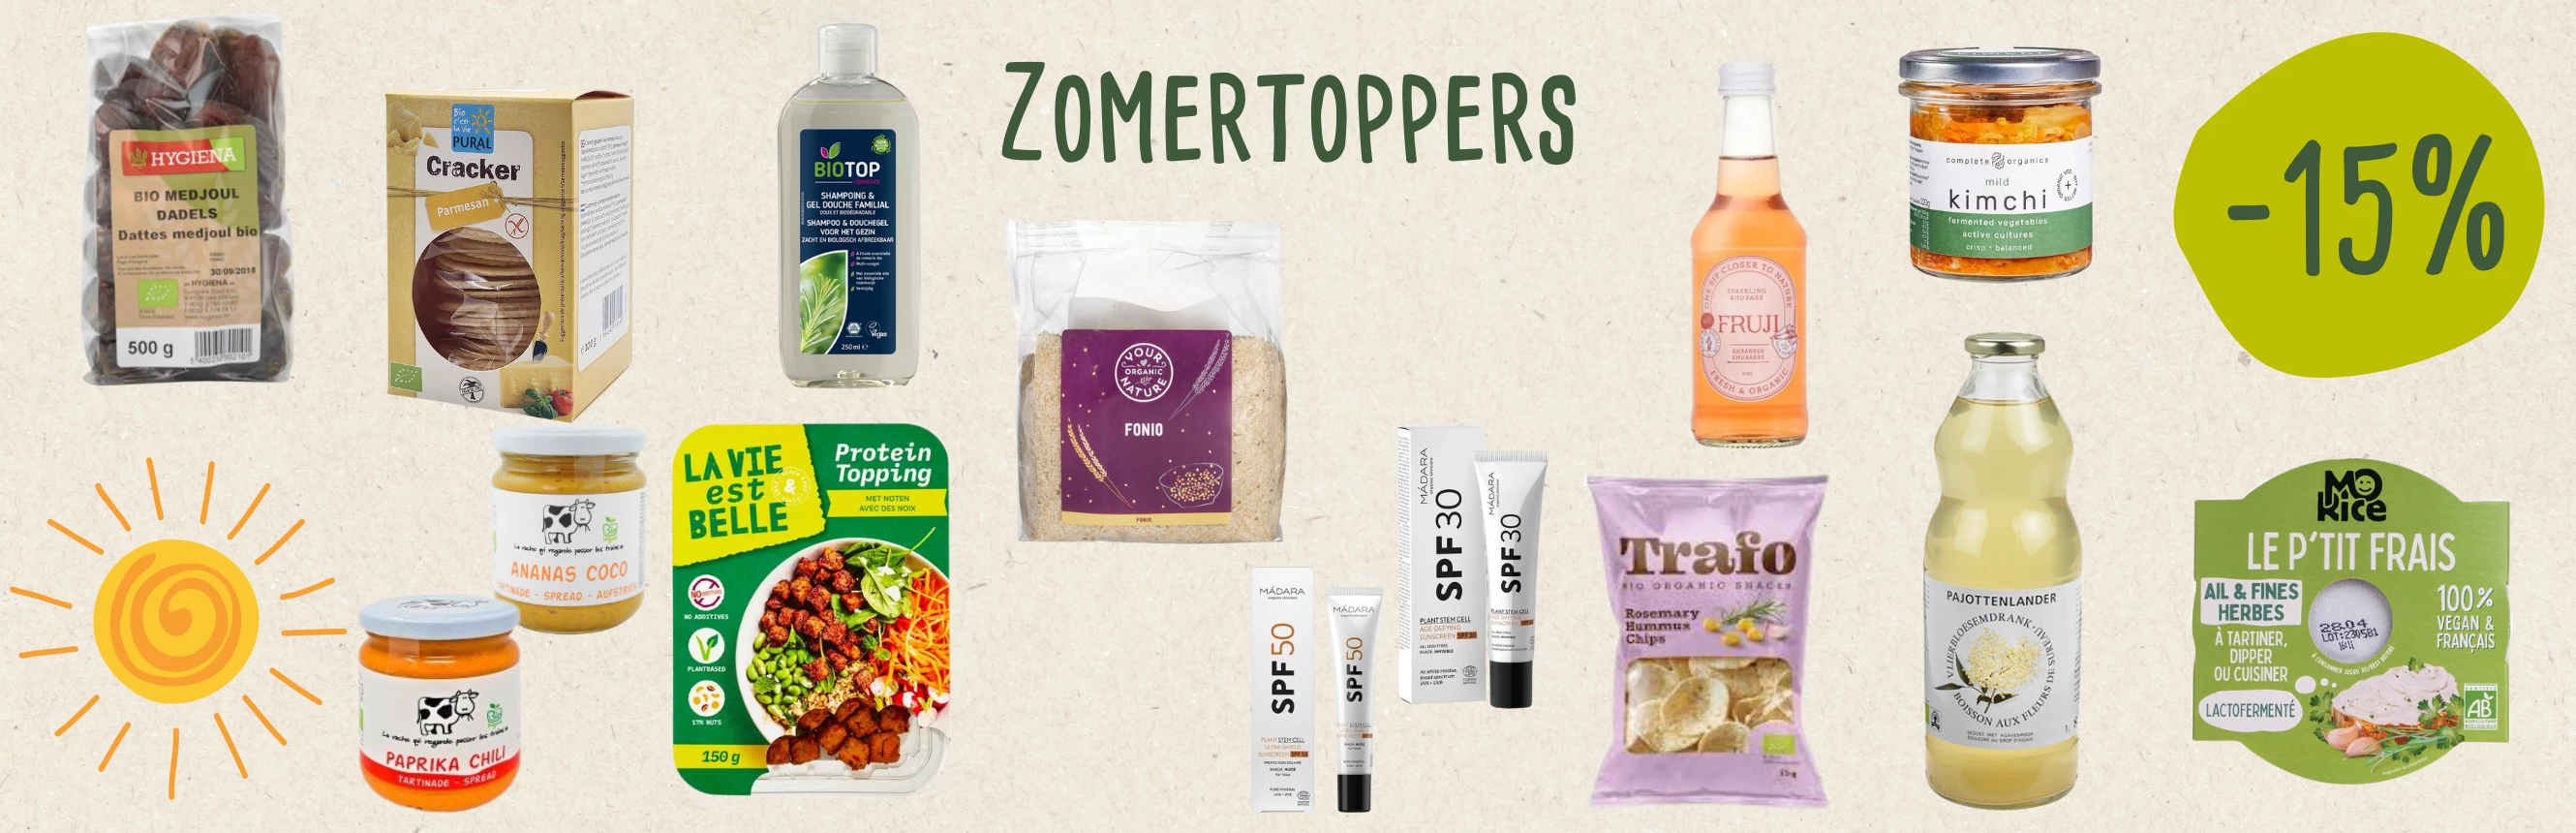 zomertoppers